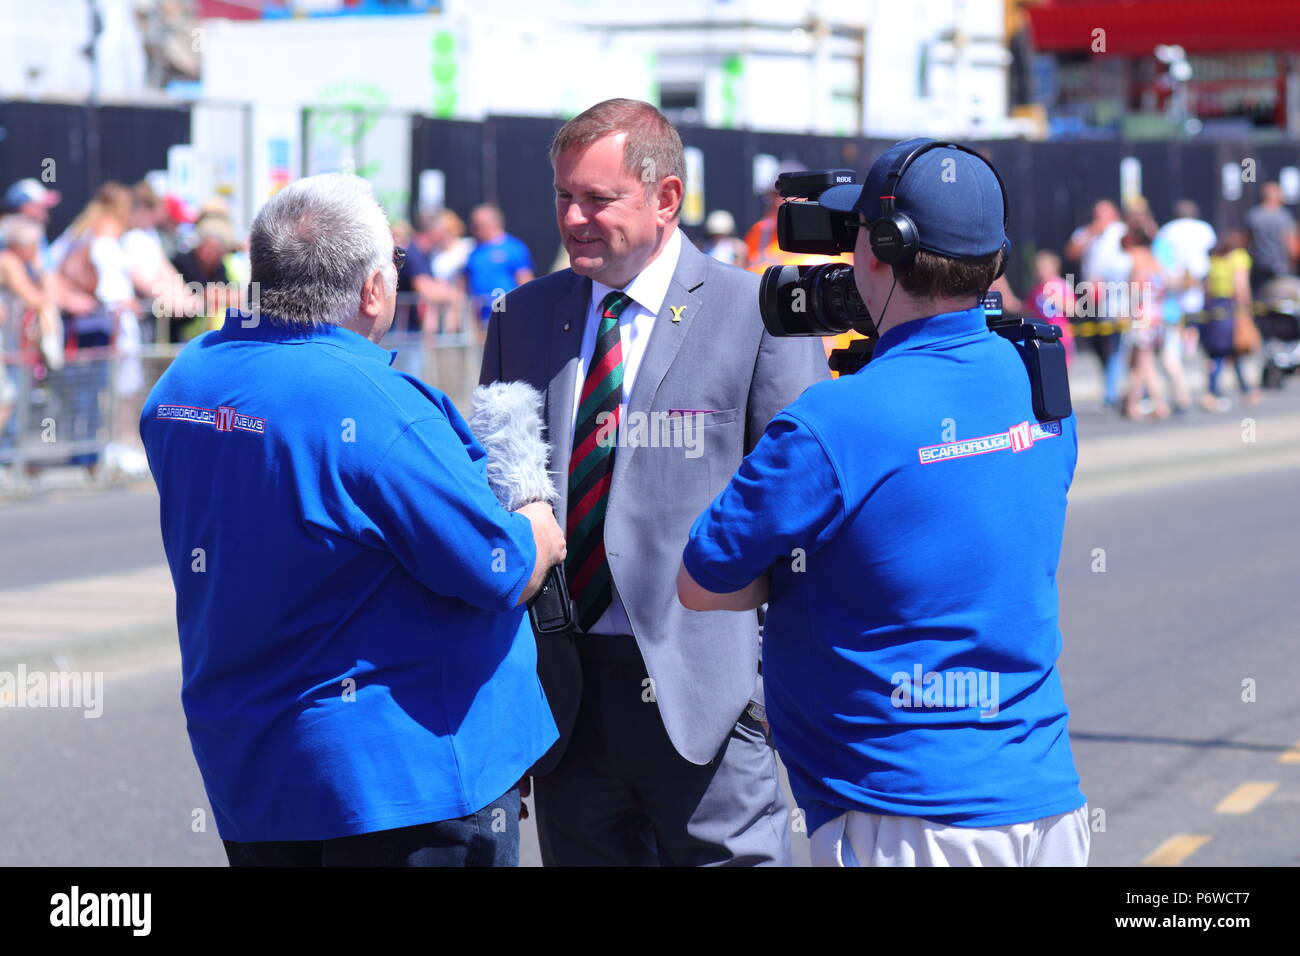 Sir Gary Verity being interviewed by Barry Robinson of Scarborough Tv News during Scarborough Armed Forces Day. Stock Photo